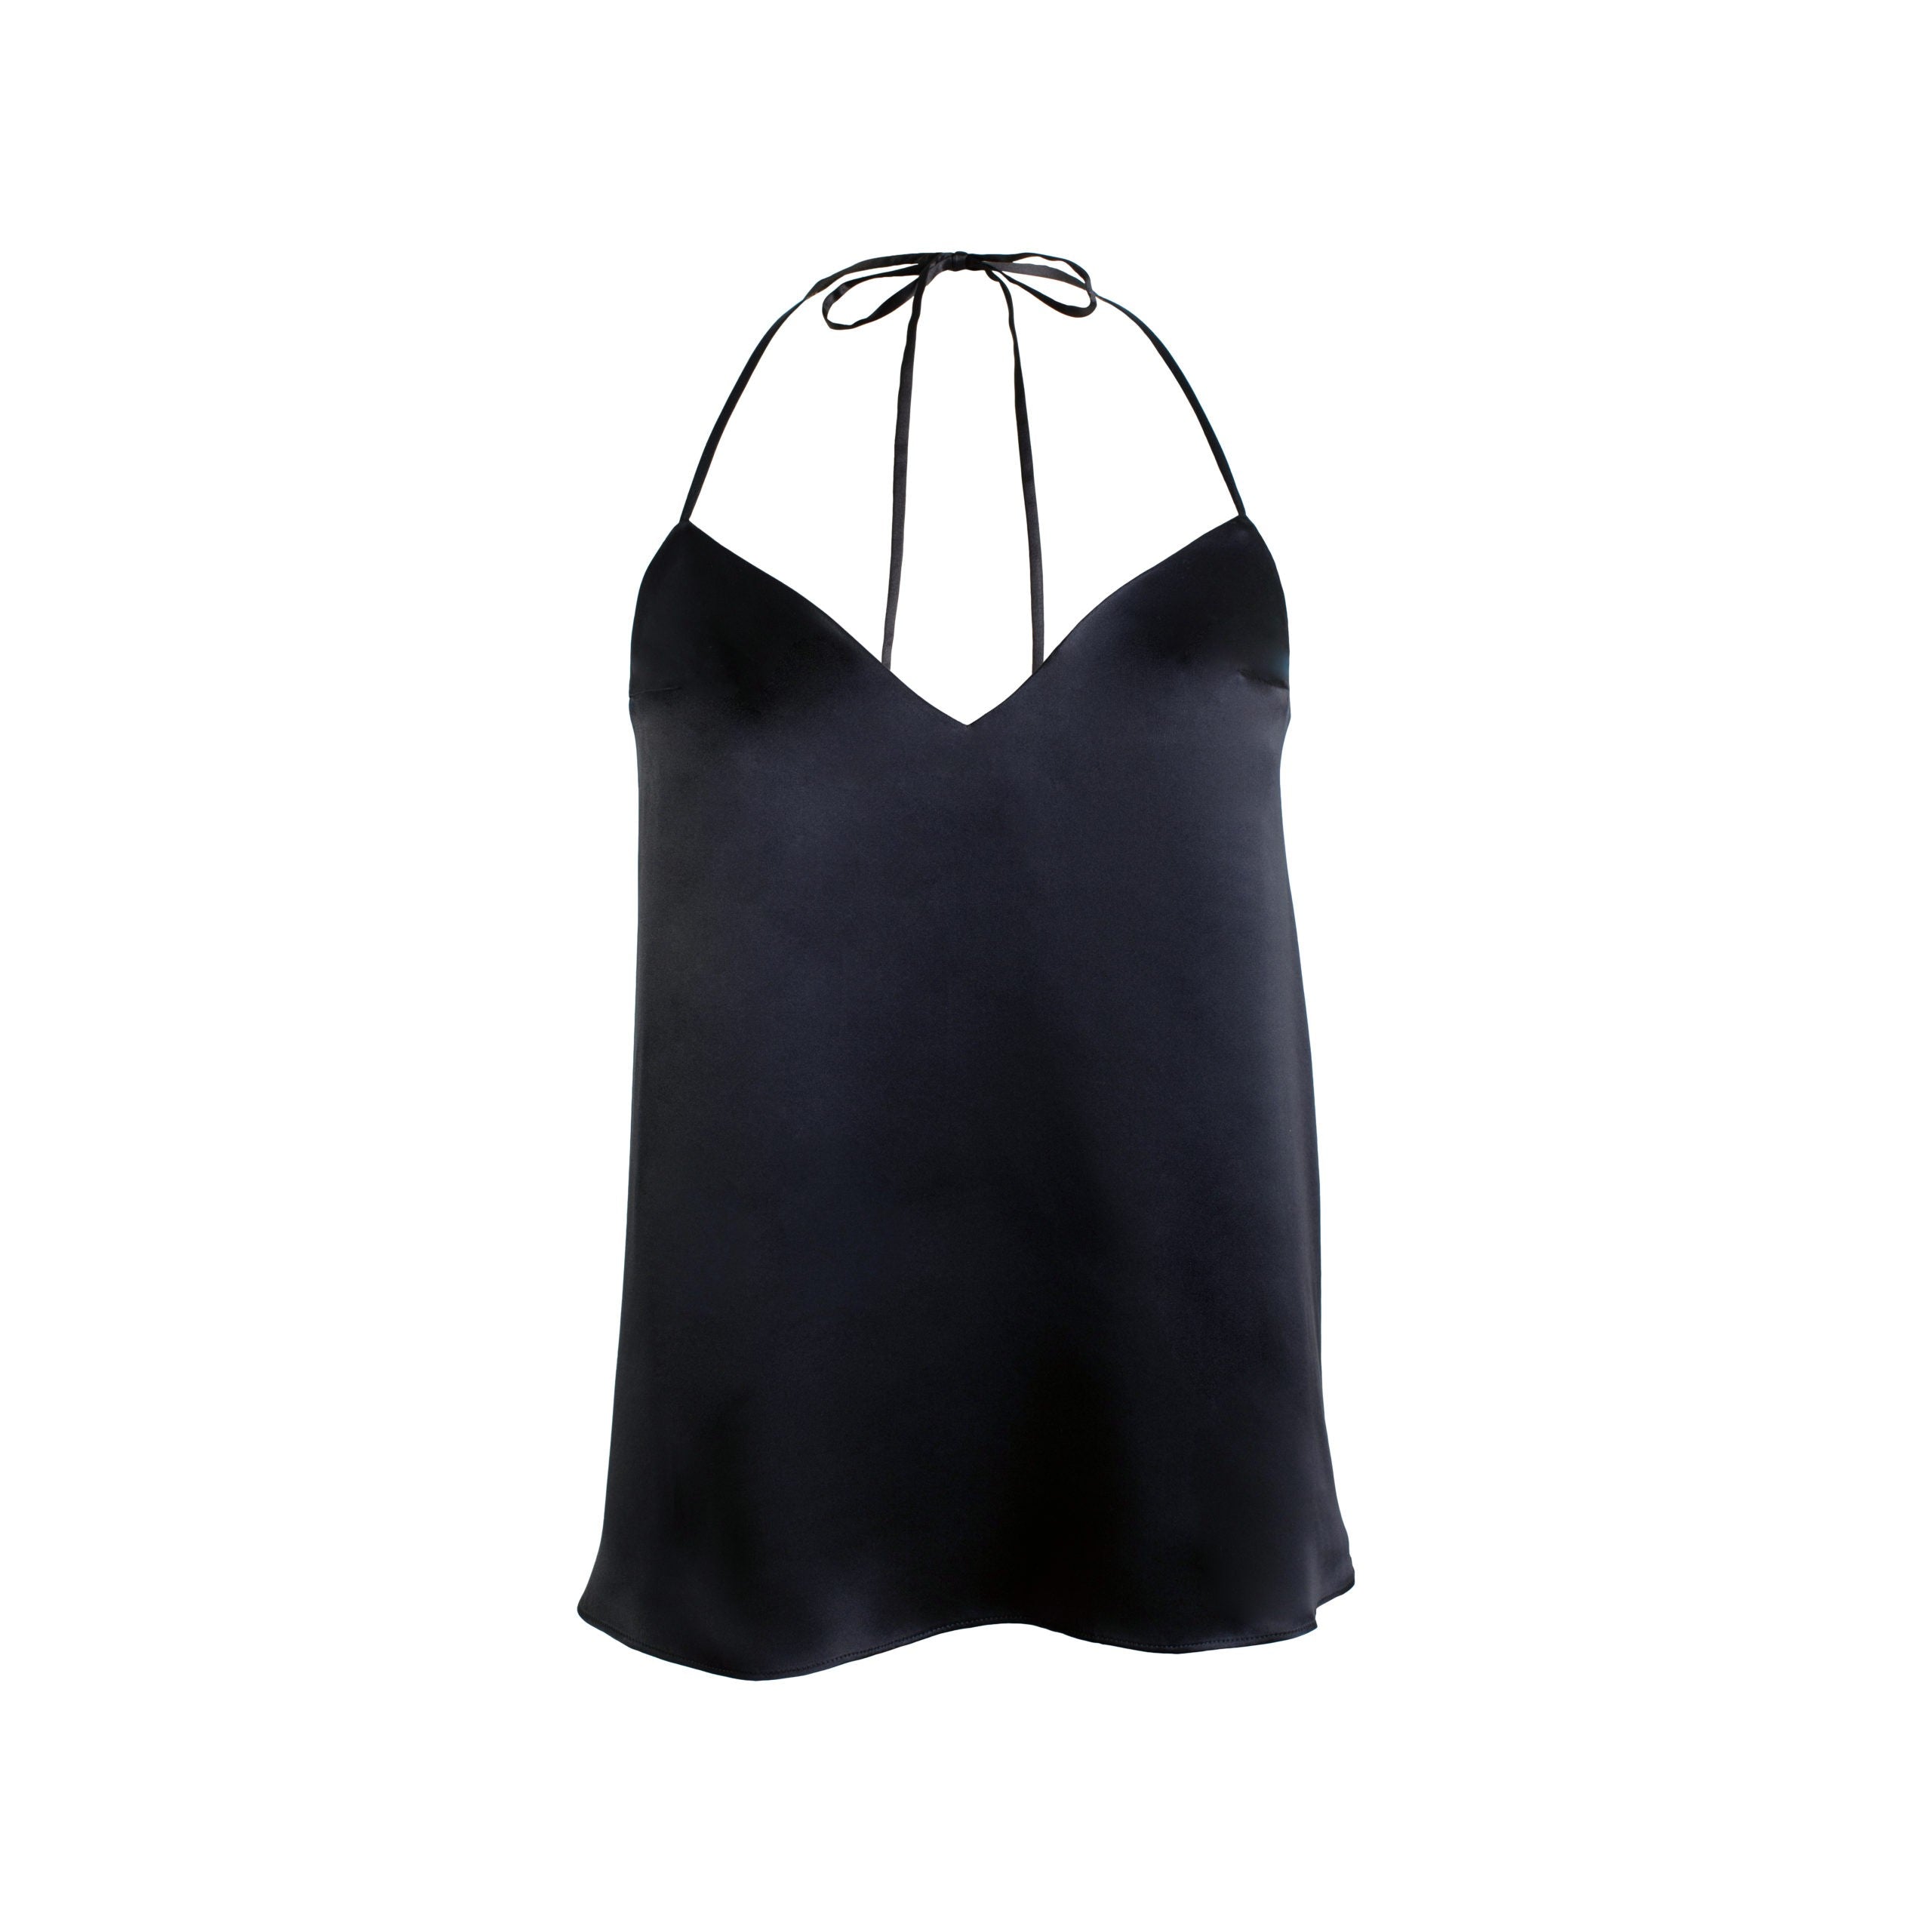 Silk satin camisole in black with Leavers lace